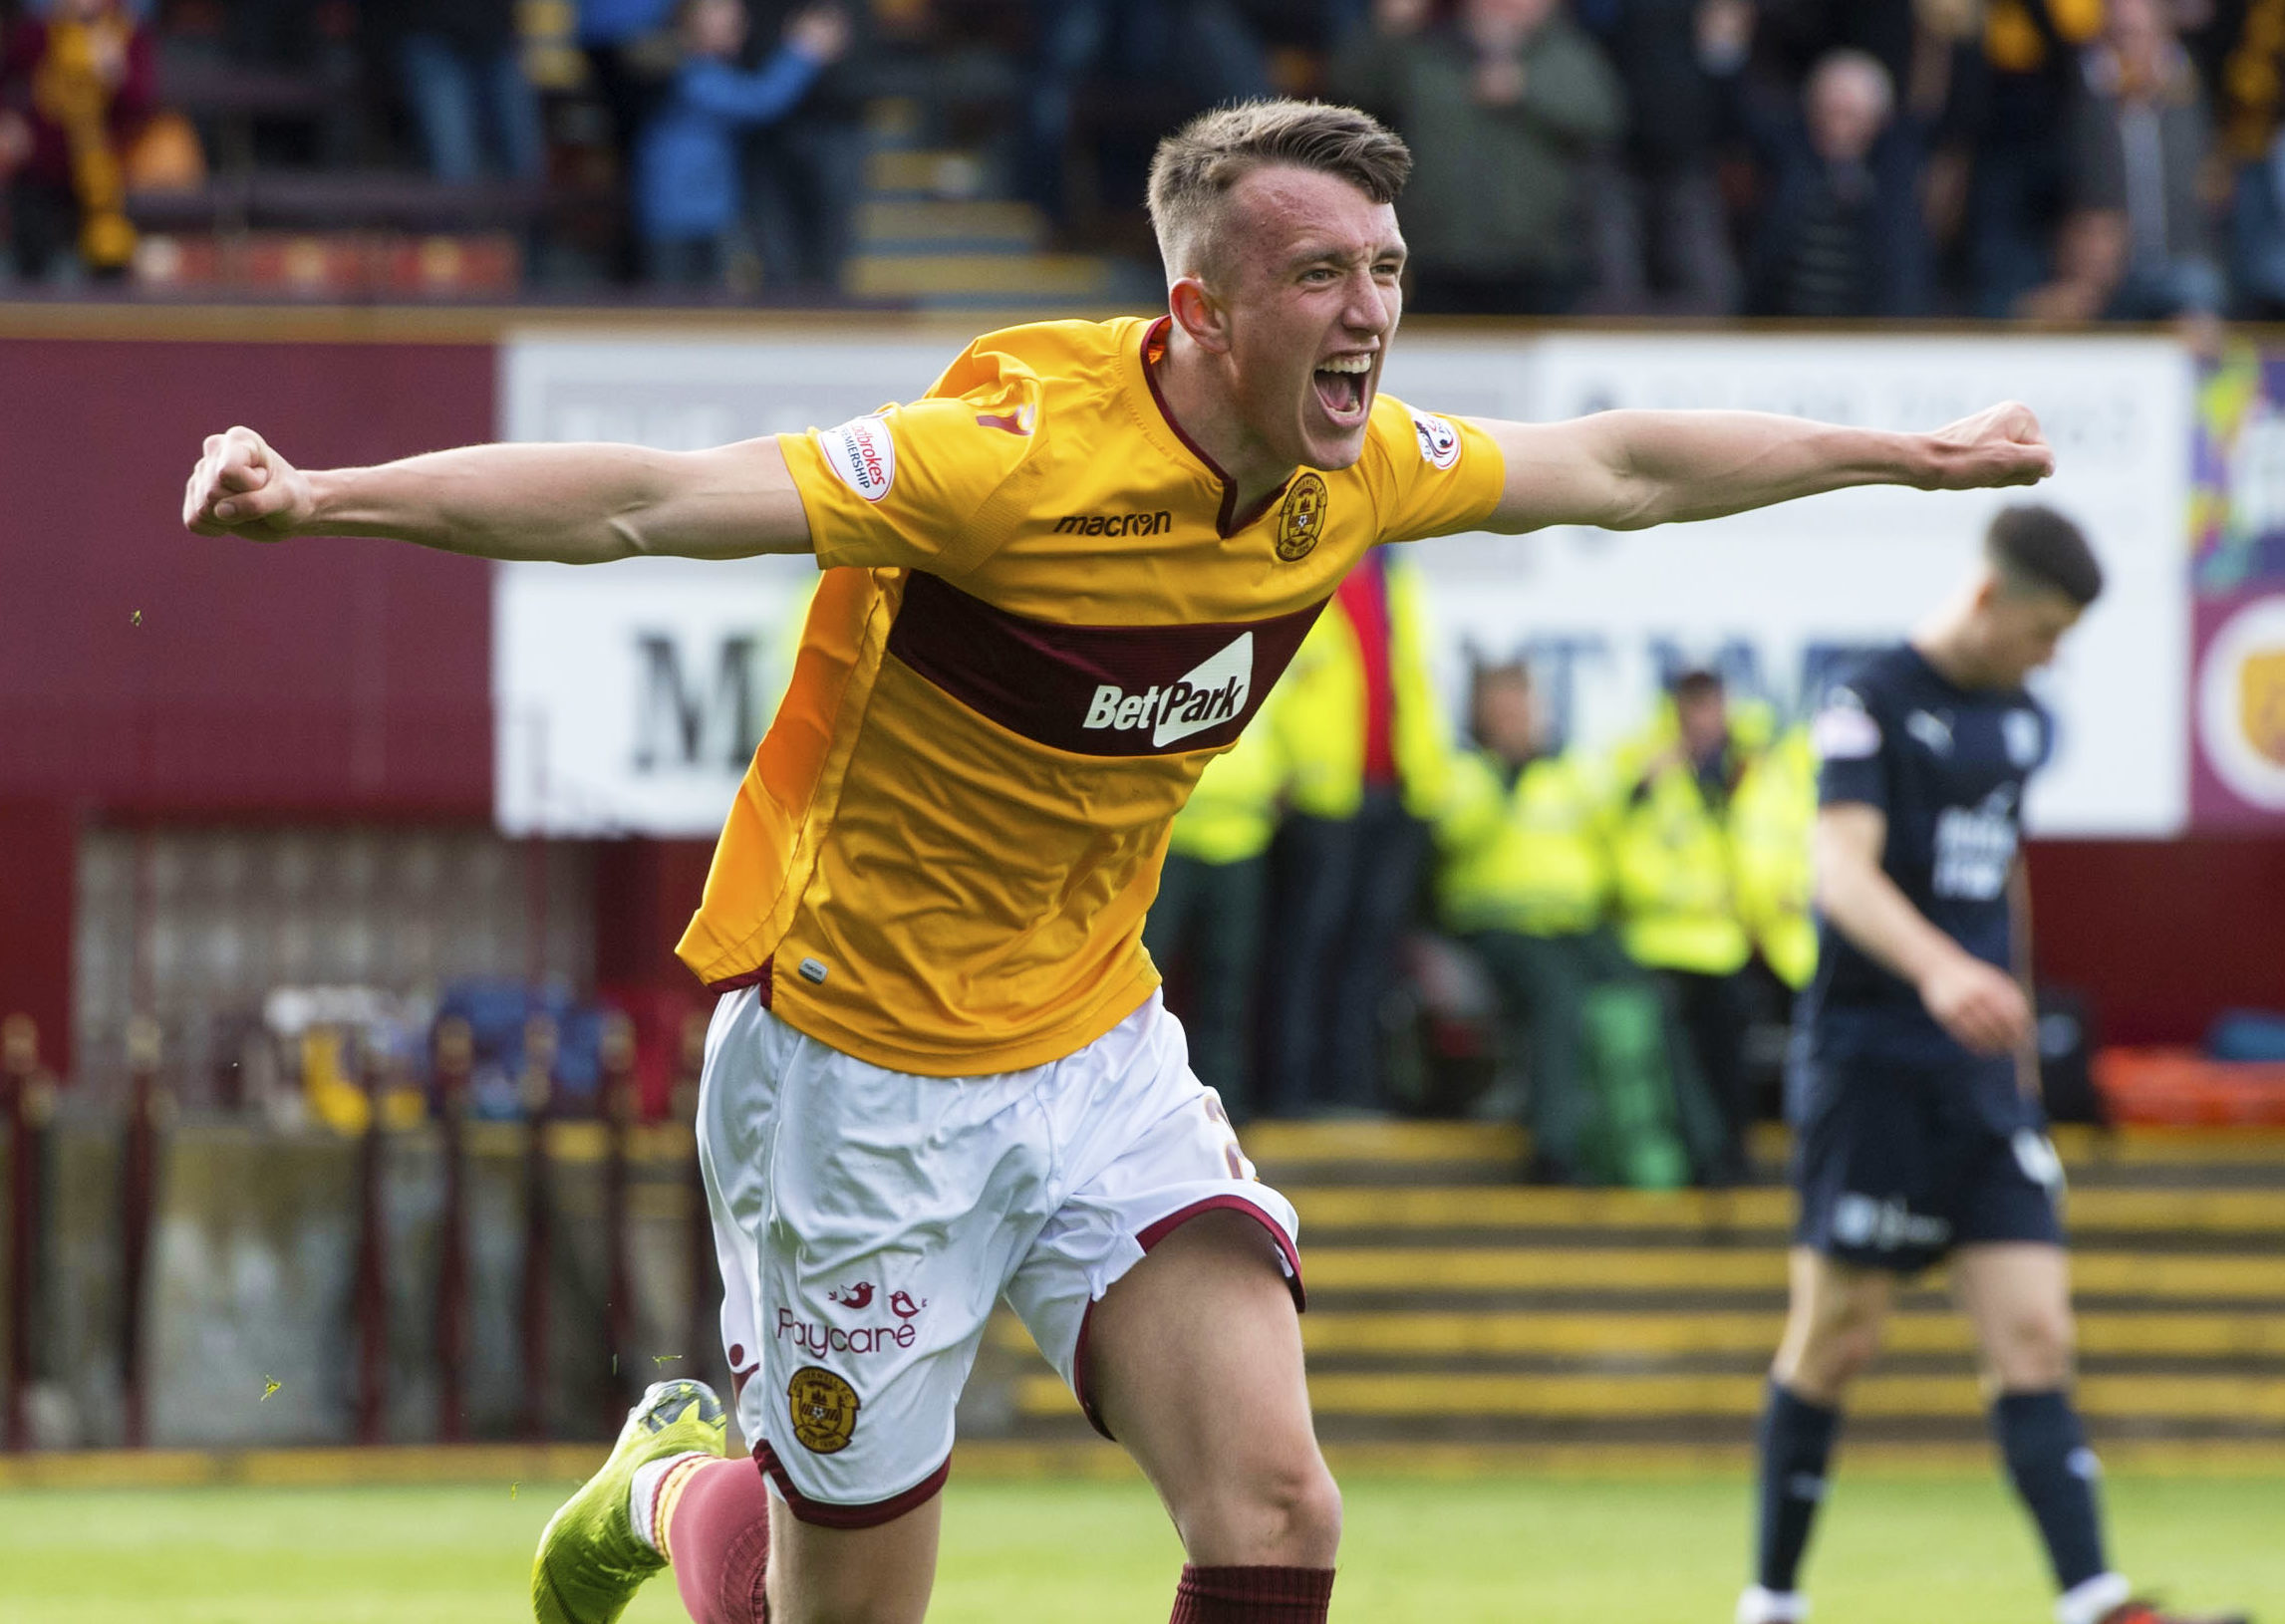 27/04/19 LADBROKES PREMIERSHIP
MOTHERWELL v DUNDEE (4-3)
FIR PARK - MOTHERWELL
Motherwell's David Turnbull celebrates making it 4-3 in the last moments of the game.